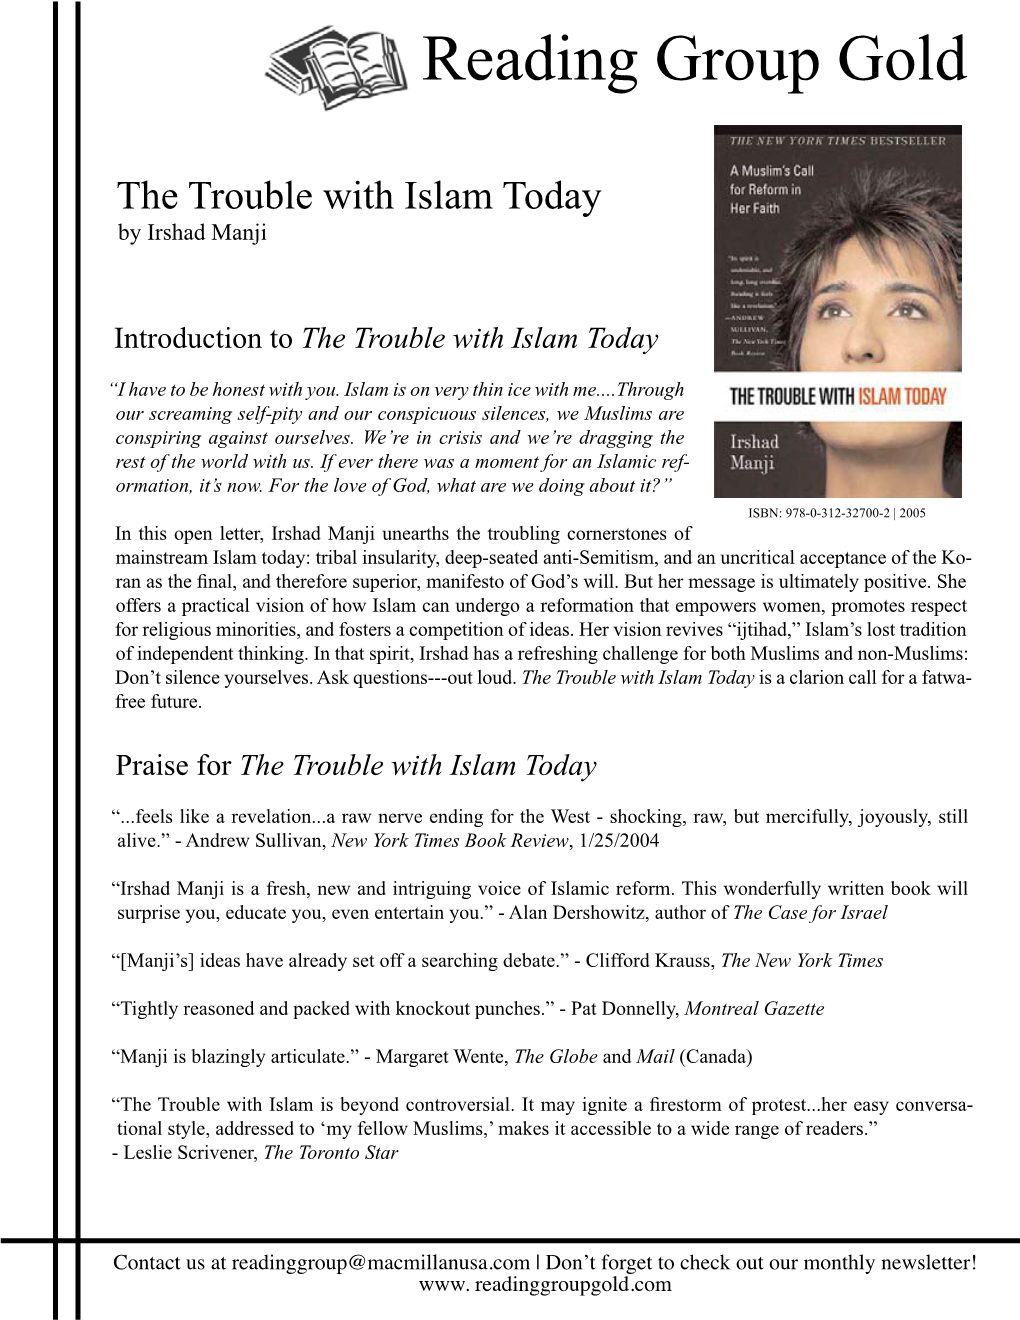 The Trouble with Islam Today by Irshad Manji